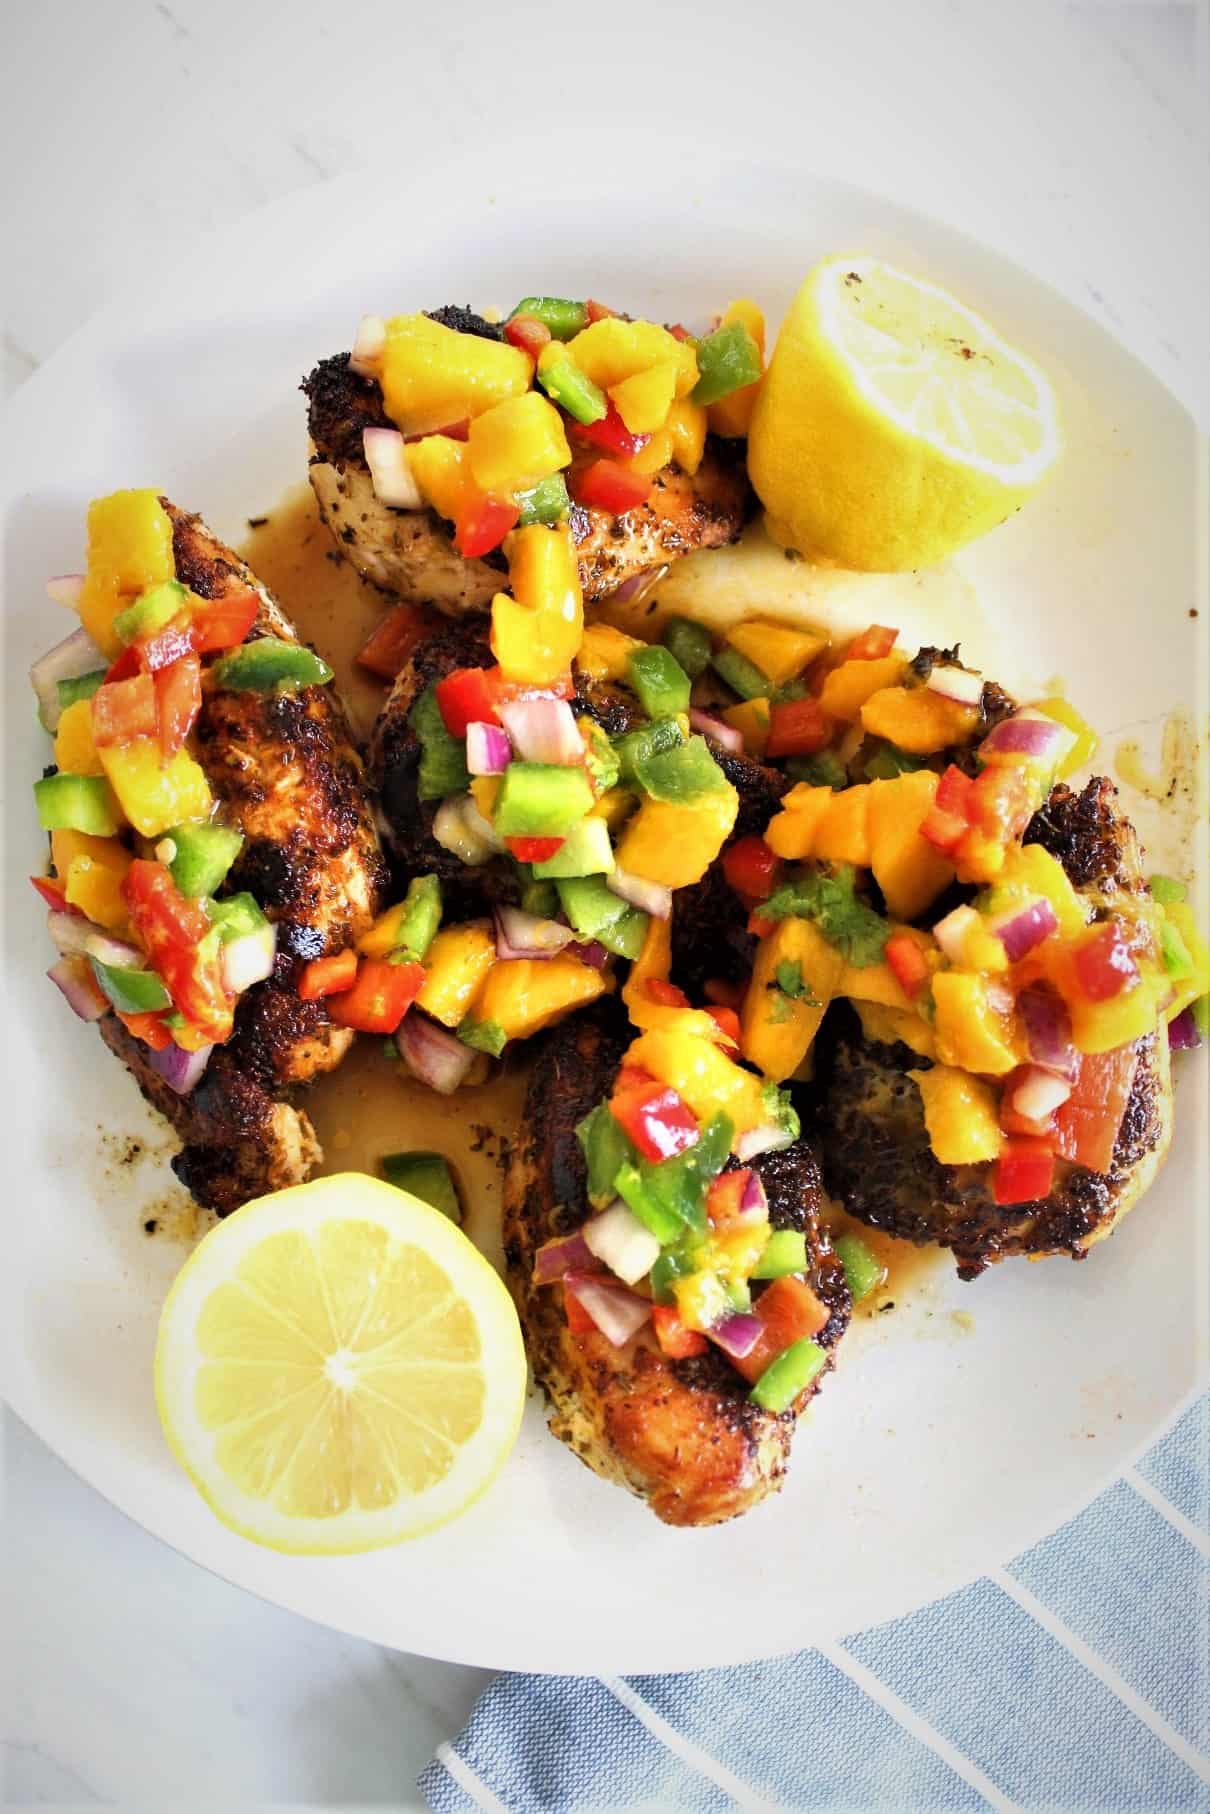 Skillet Chicken in Mango Salsa - picture shows a large round plate with cooked chicken topped with a mango salsa. There are 2 lemon halves in the plate too. 